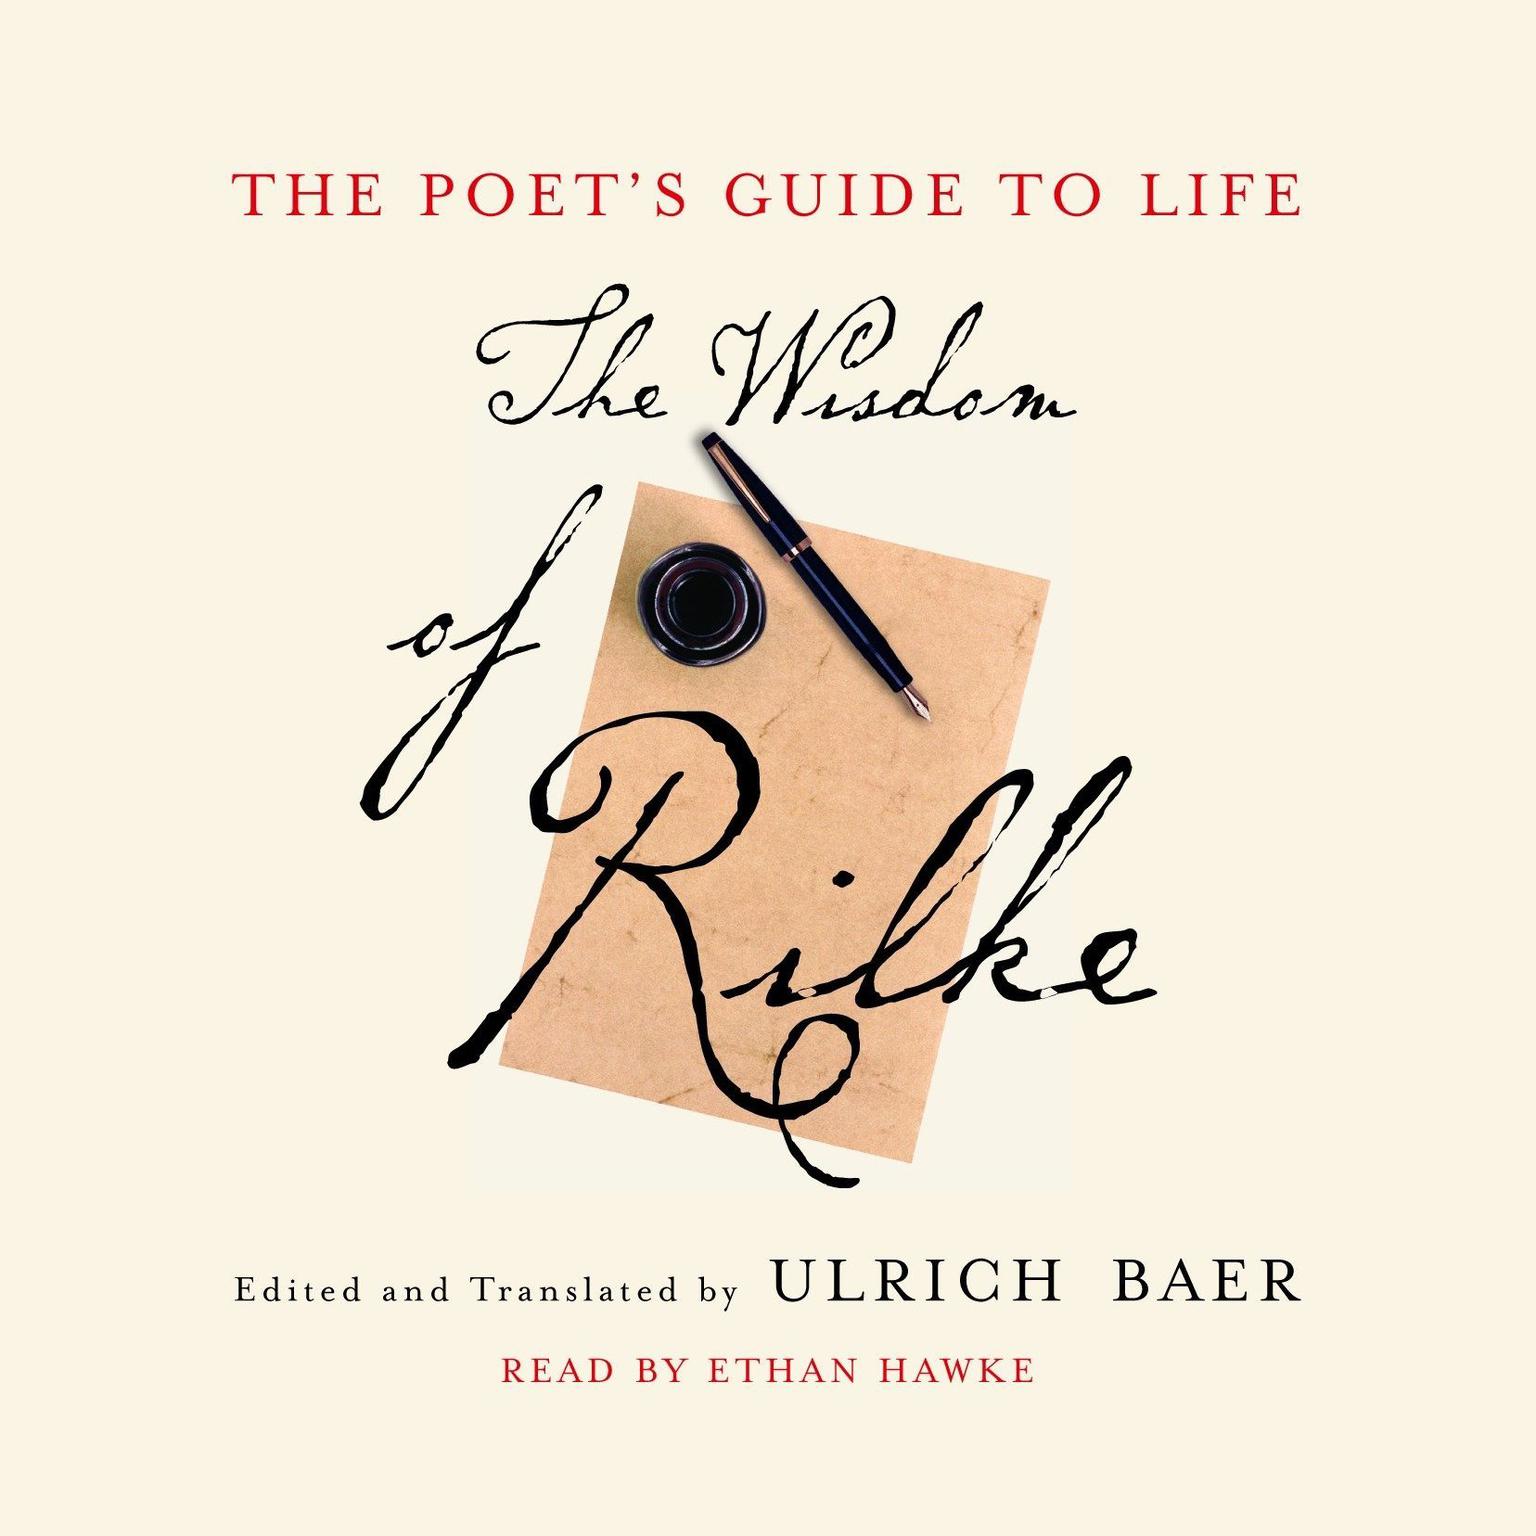 The Poets Guide to Life (Abridged): The Wisdom of Rilke Audiobook, by Ulrich Baer